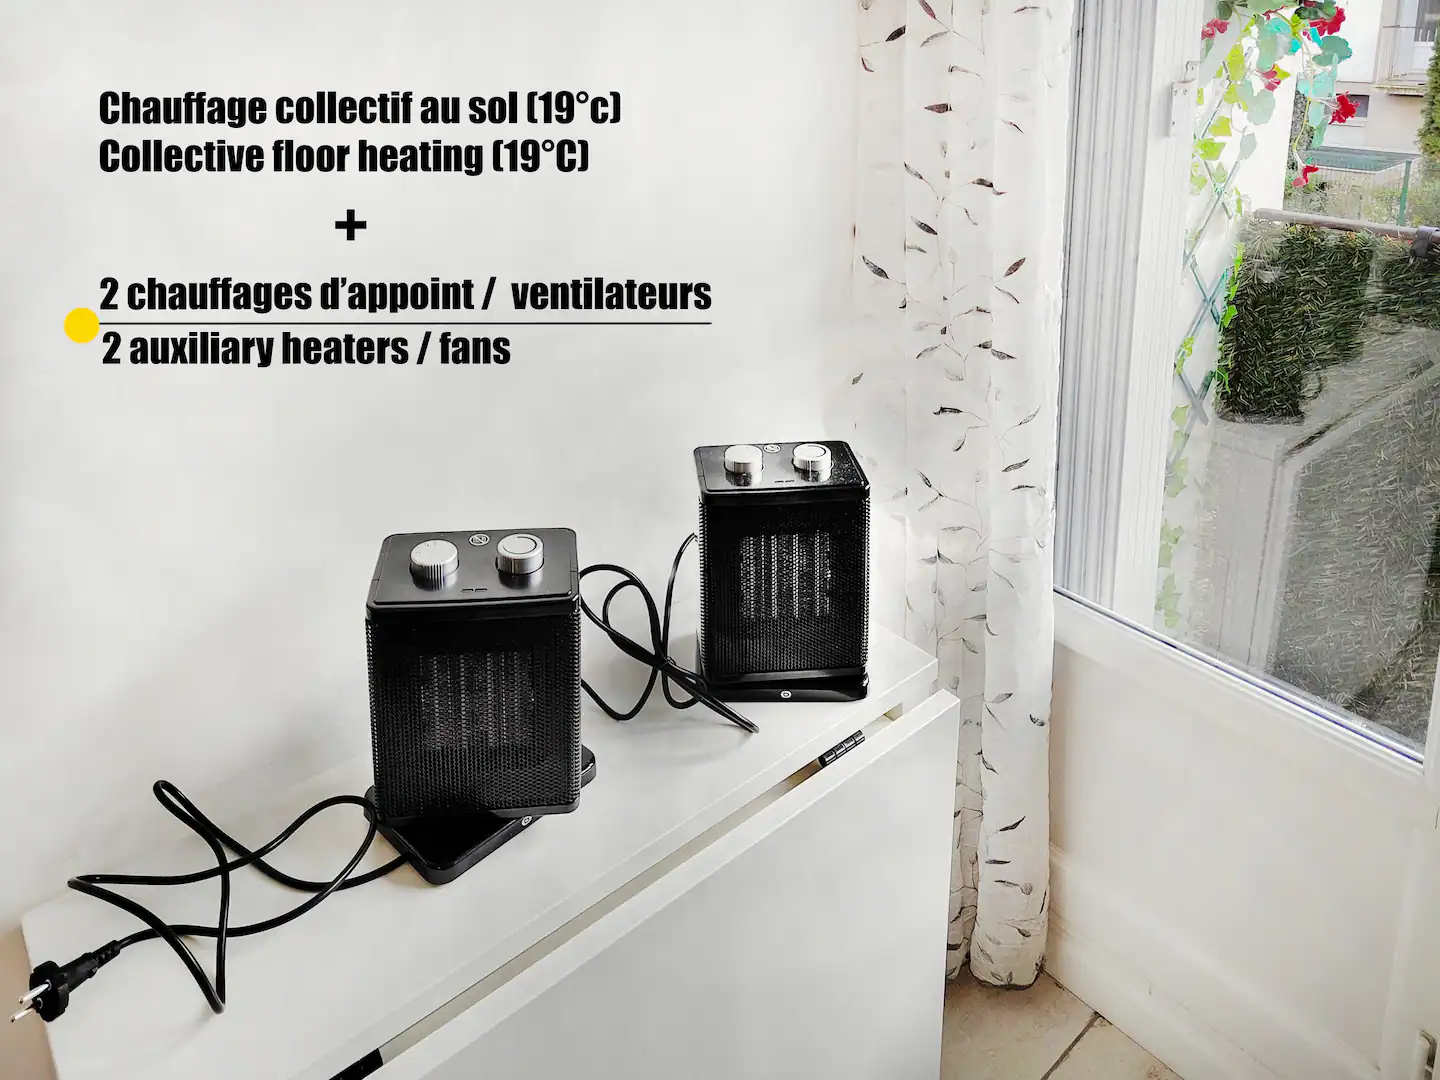 In addition to the main floor heating at 19°C, there are three extra heaters to keep you cozy and comfortable.